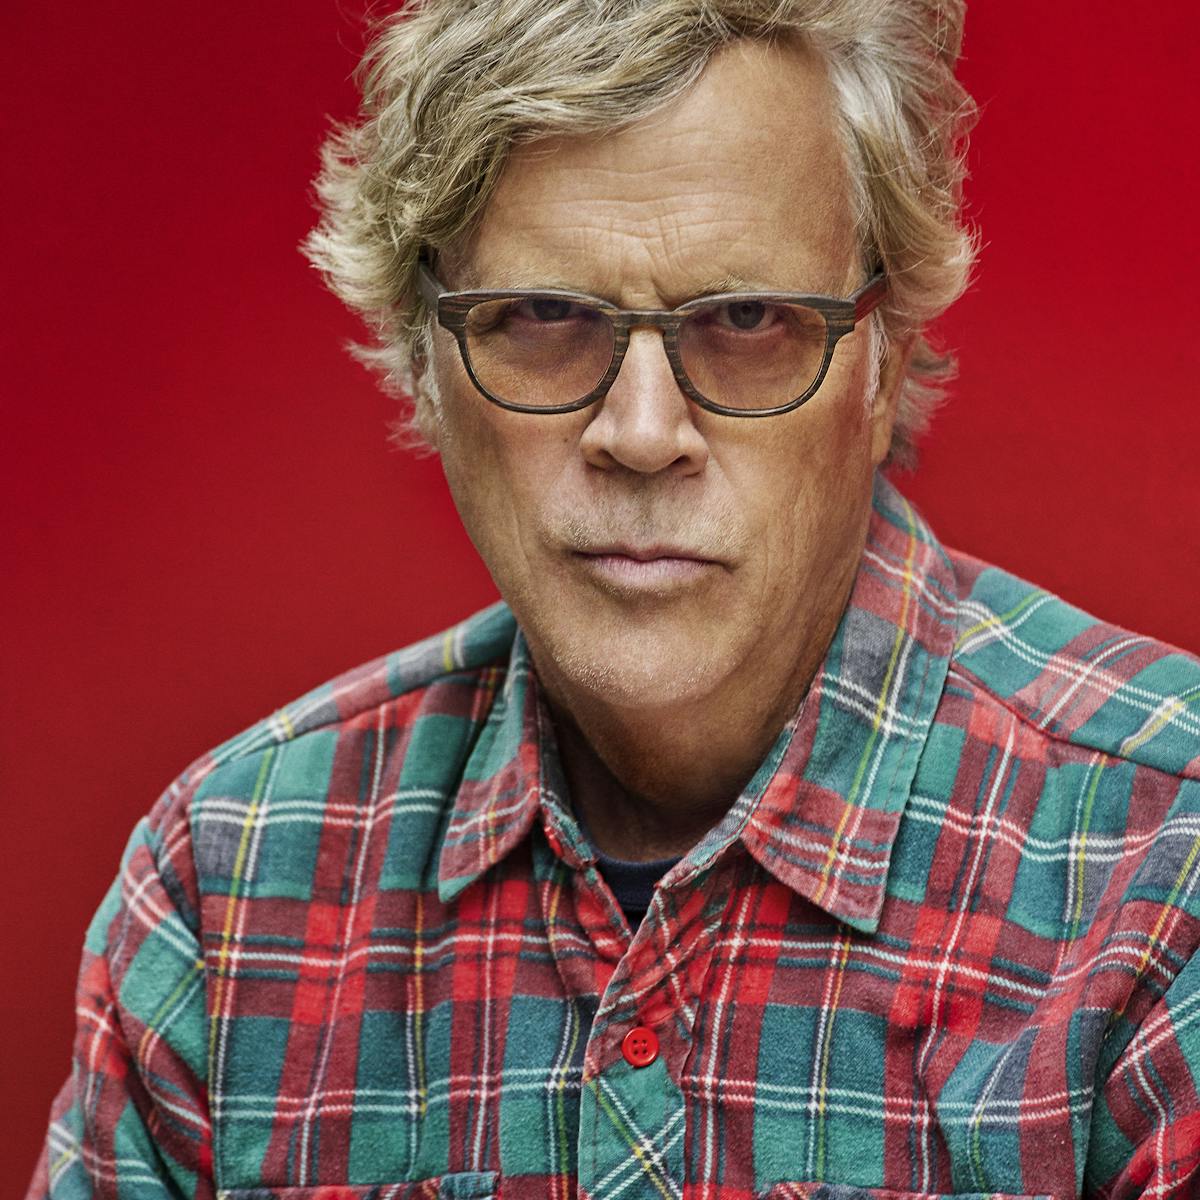 Todd Haynes wears a Christmas-y plaid flannel shirt and dark glasses against a red background.